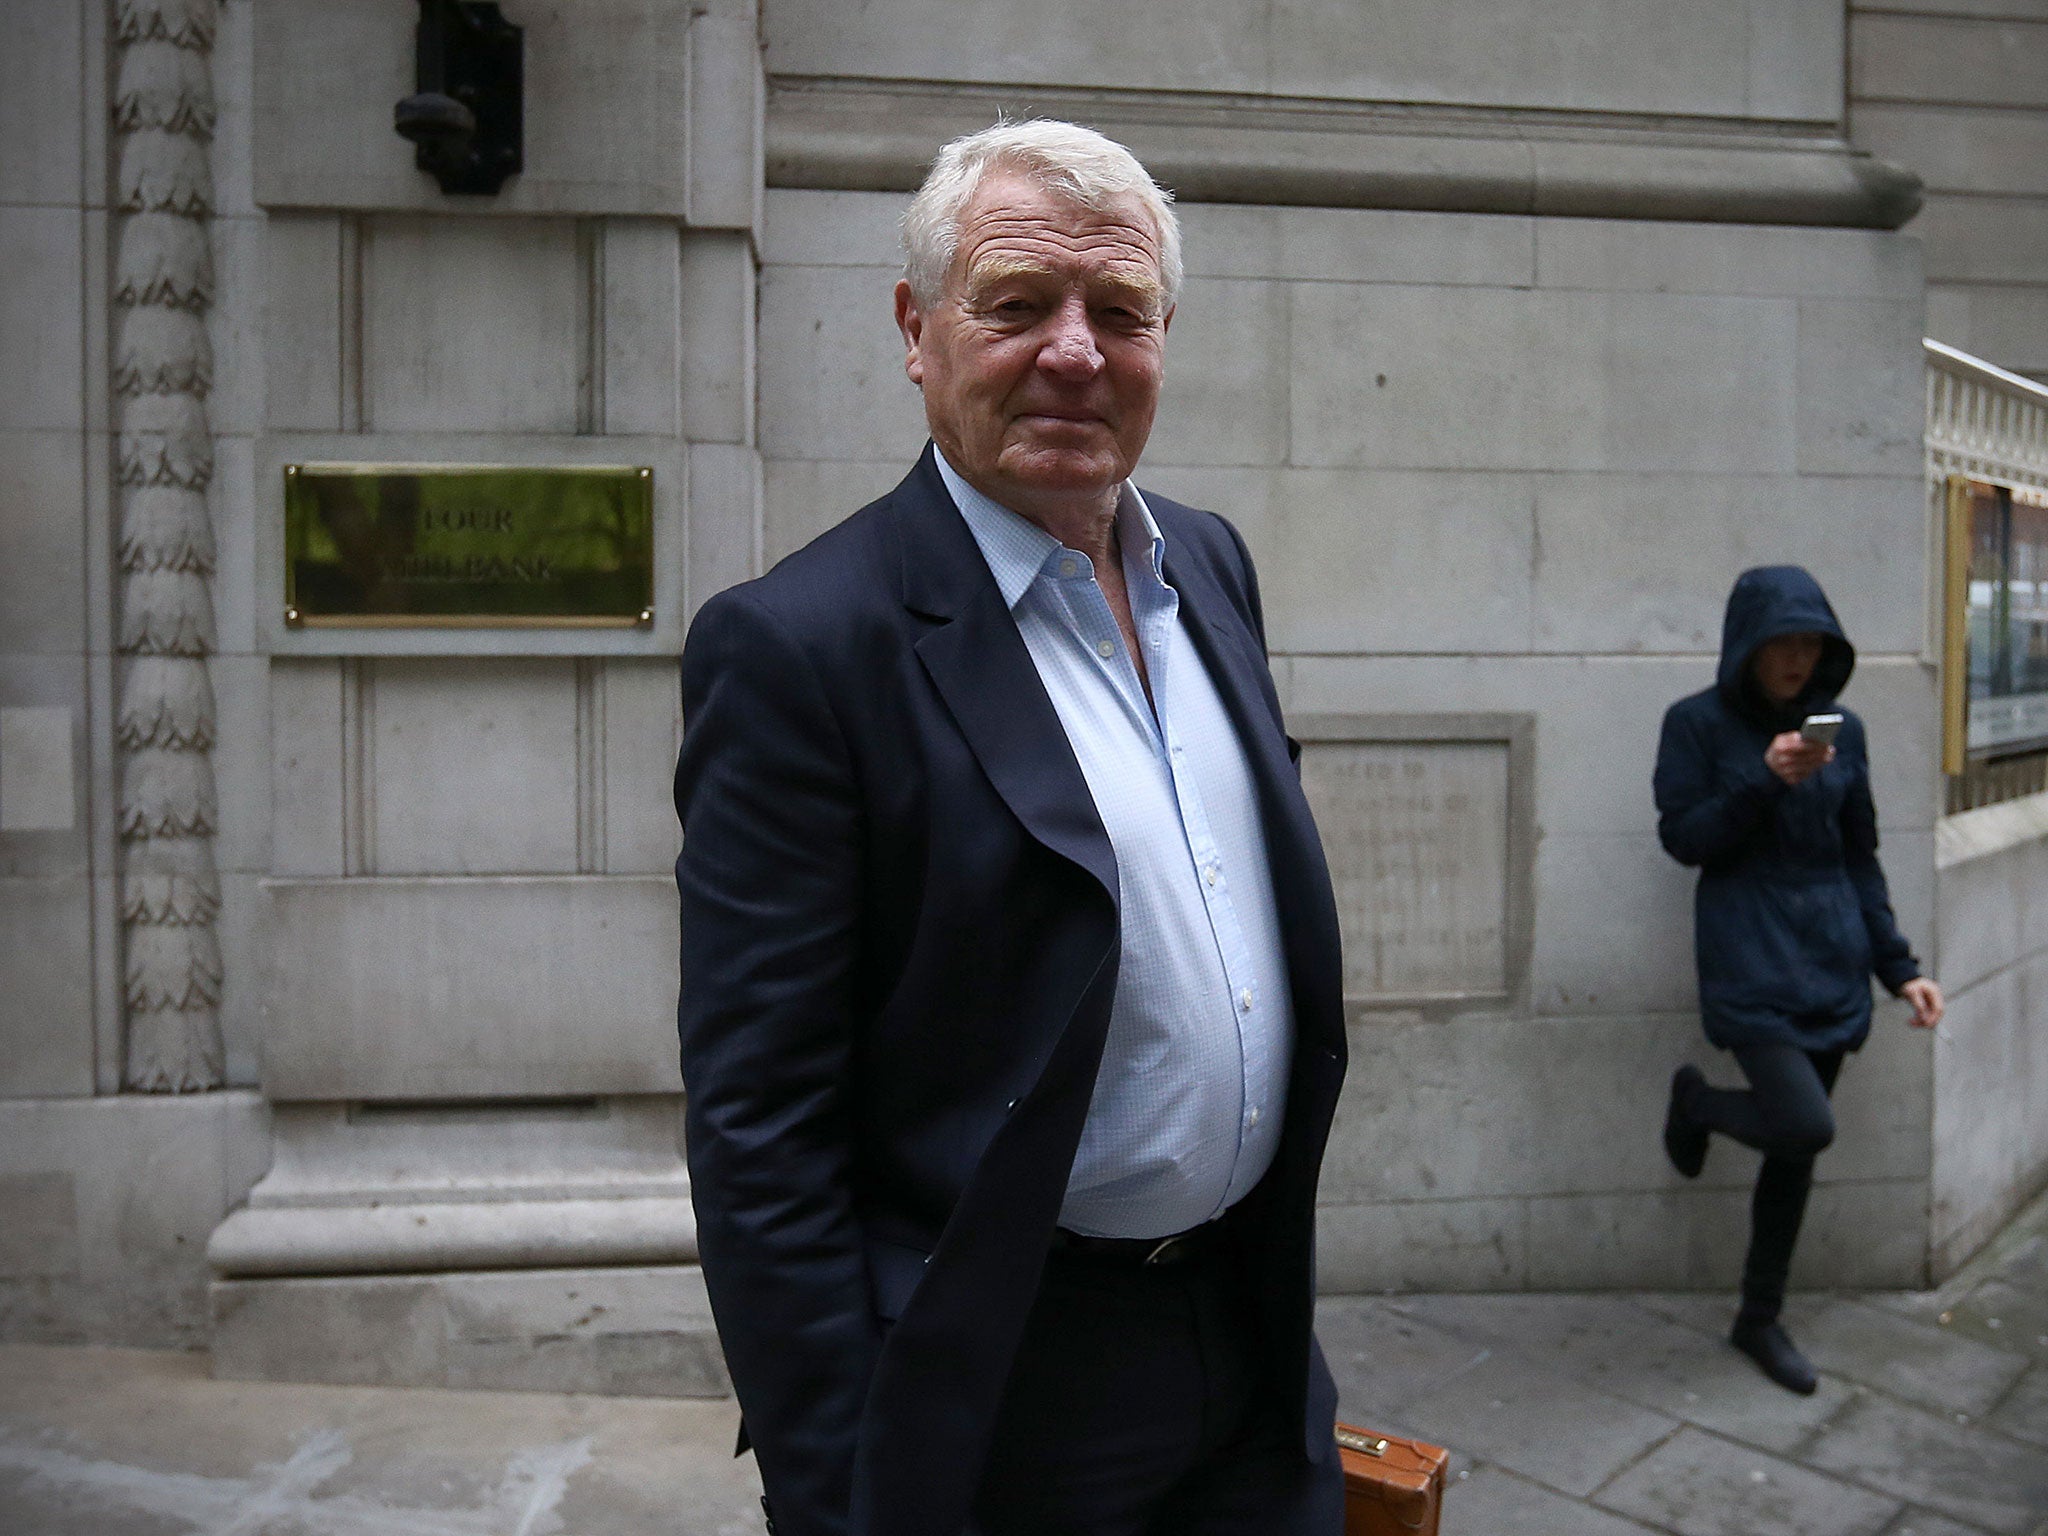 Paddy Ashdown: ‘It’s time to reach out beyond our tribal barriers and build a wider progressive movement which can oppose and in time replace the Tories by giving a voice to the new voiceless in Britain’